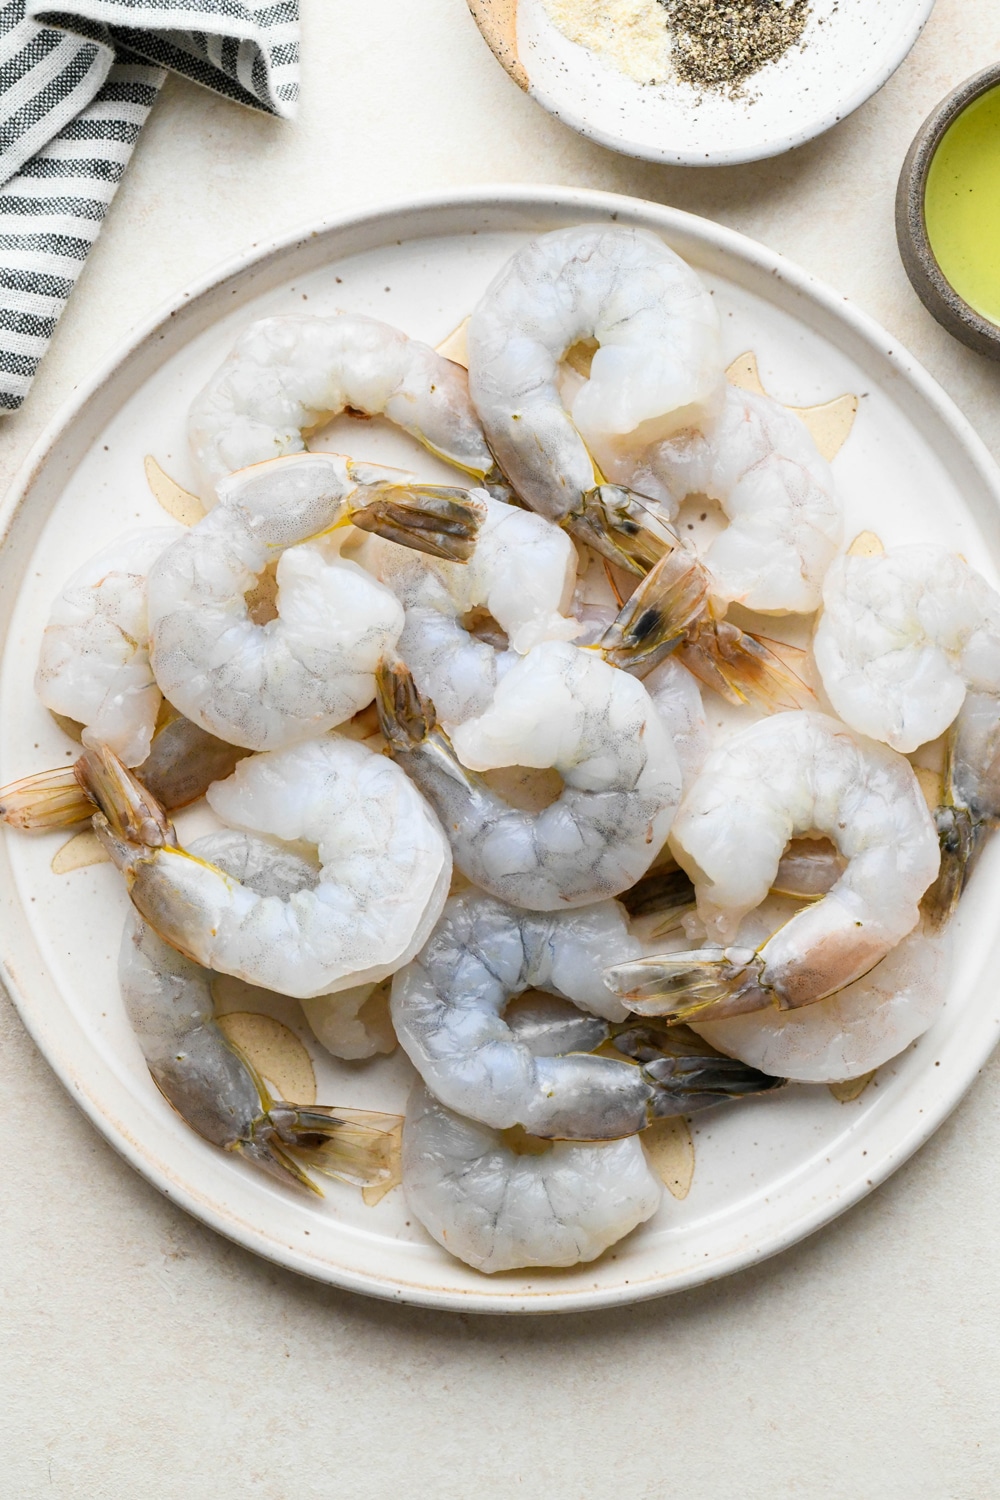 Ingredients for pan seared shrimp on various ceramics on a cream colored background, next to a blue and white striped napkin.